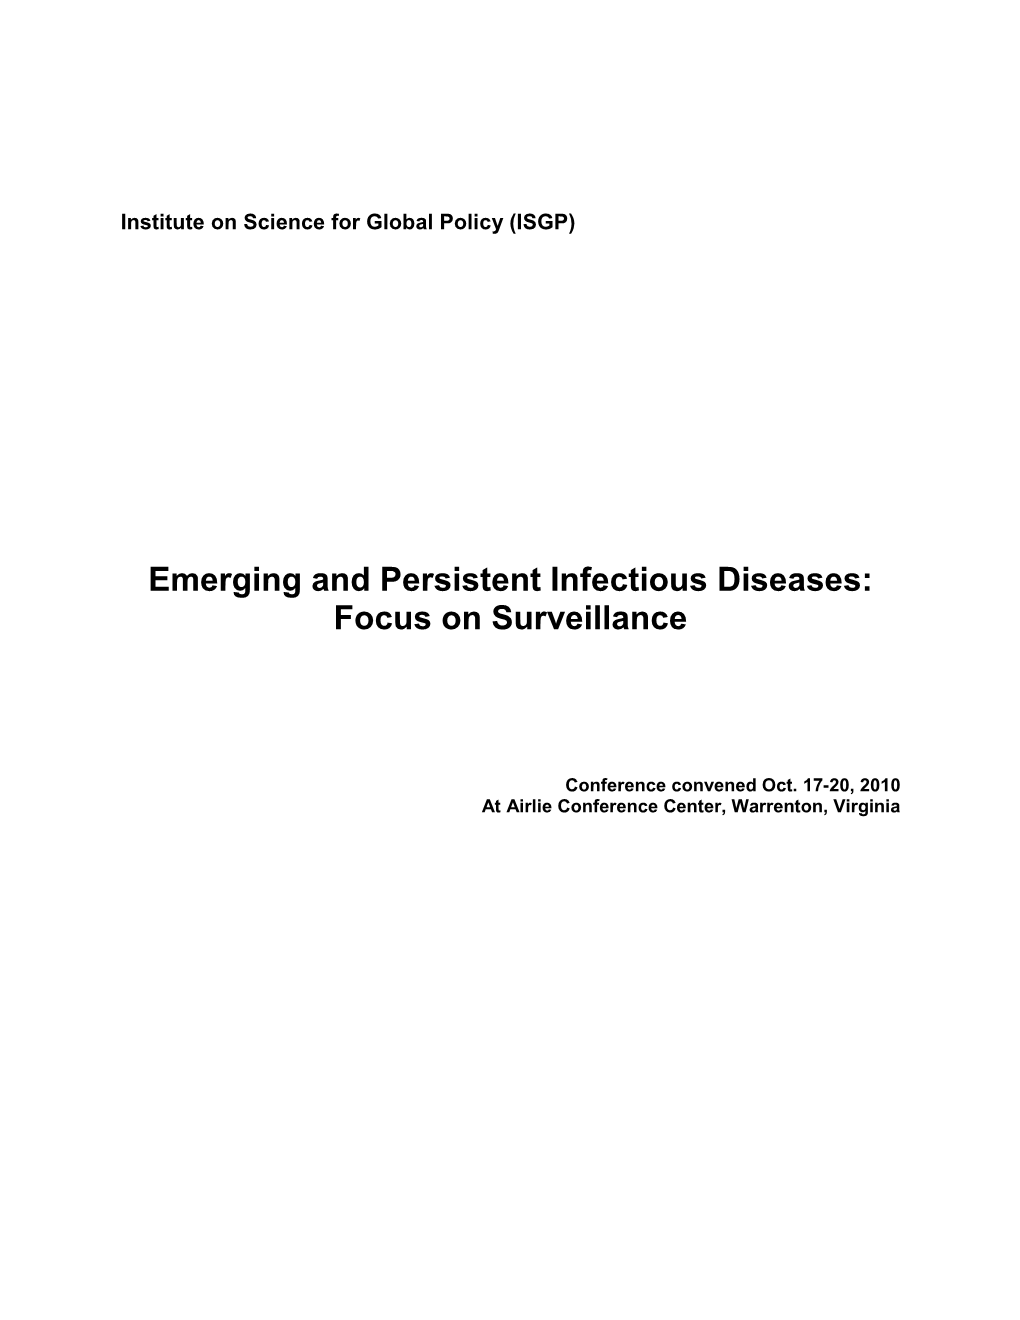 Emerging and Persistent Infectious Diseases: Focus on Surveillance